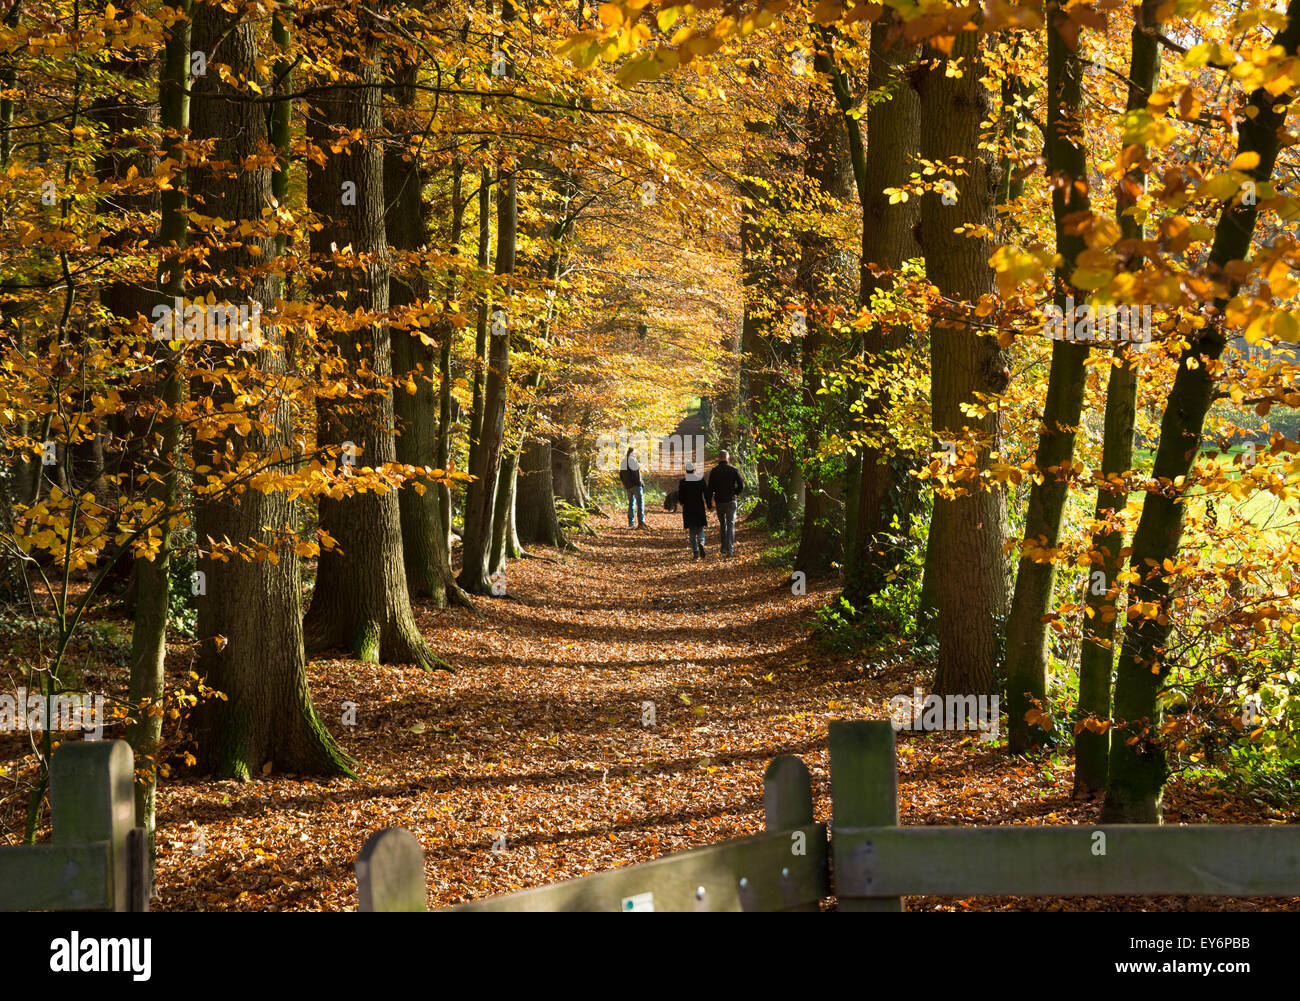 pathway in autumn forest with some hikers Stock Photo